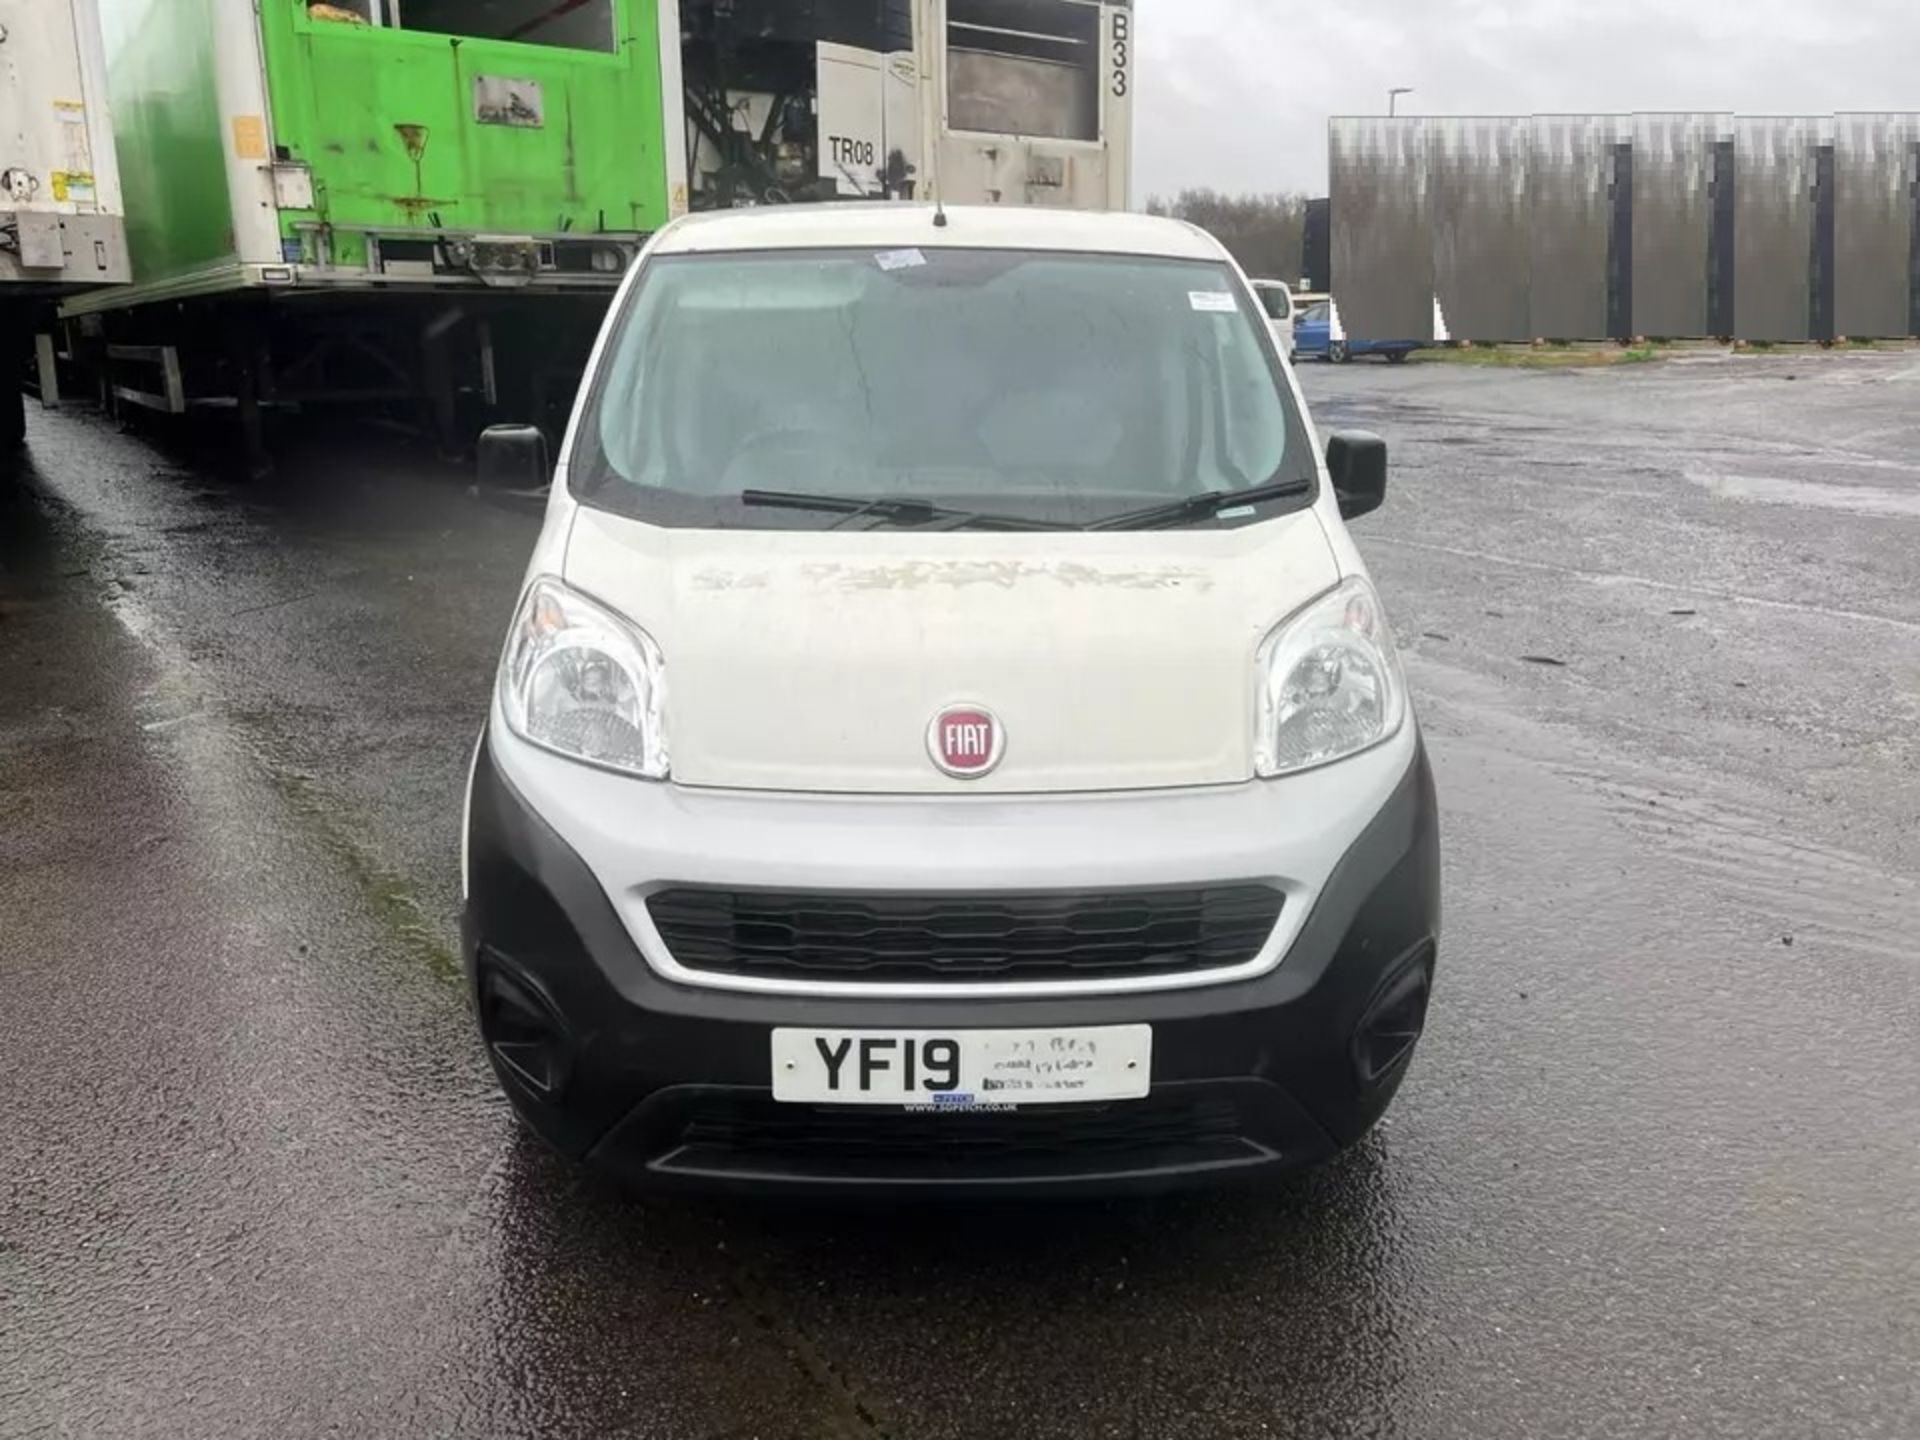 FIAT FIORINO SX 1.3 HDI VAN 2019 - LOADED WITH FEATURES, SOLD FOR SPARES OR REPAIRS - Image 2 of 12